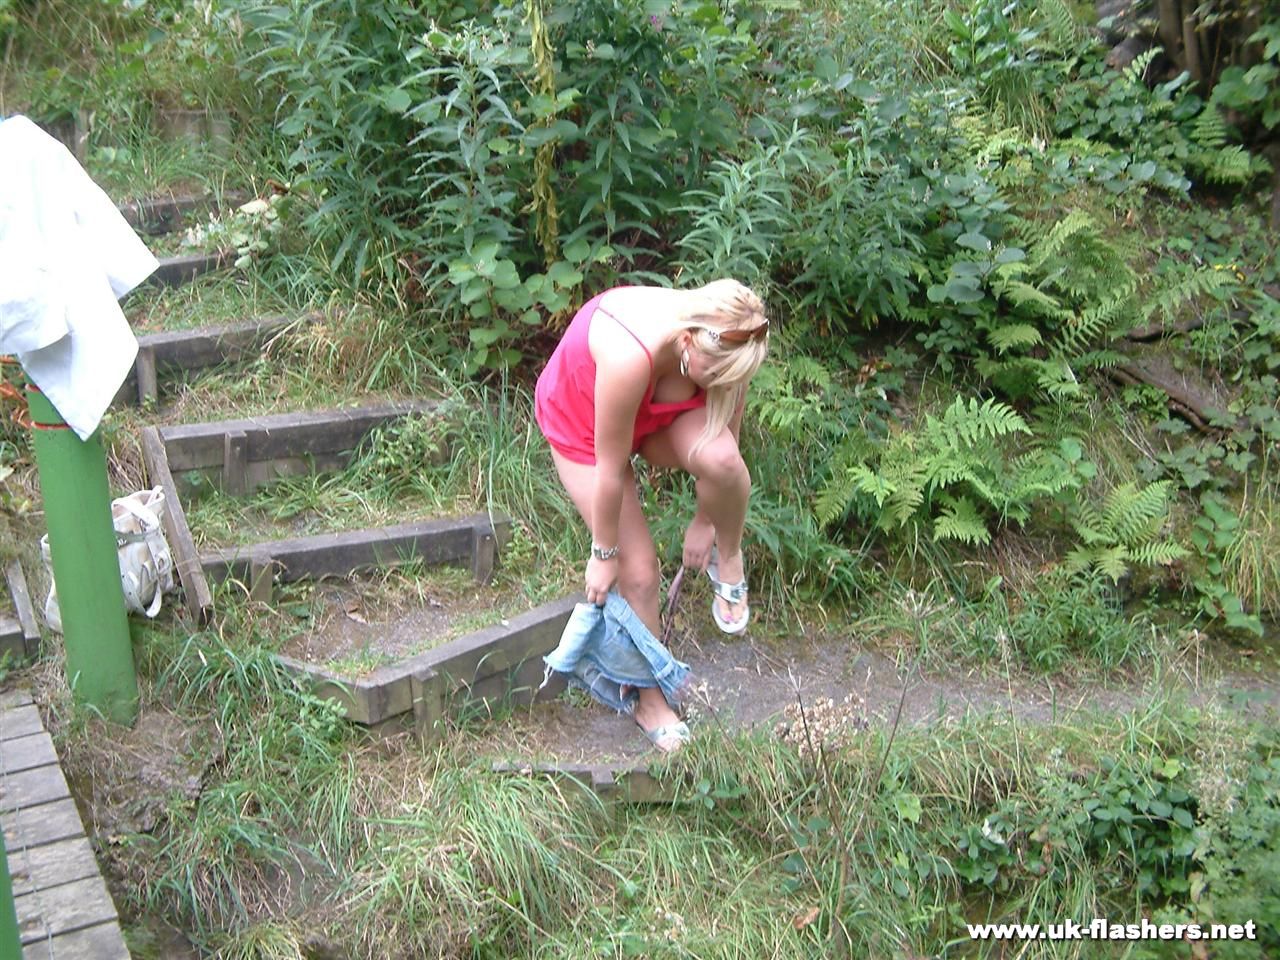 Overweight UK female with blonde hair strips naked on a popular walking trails 色情照片 #428197331 | UK Flashers Pics, Lena Leigh, Public, 手机色情